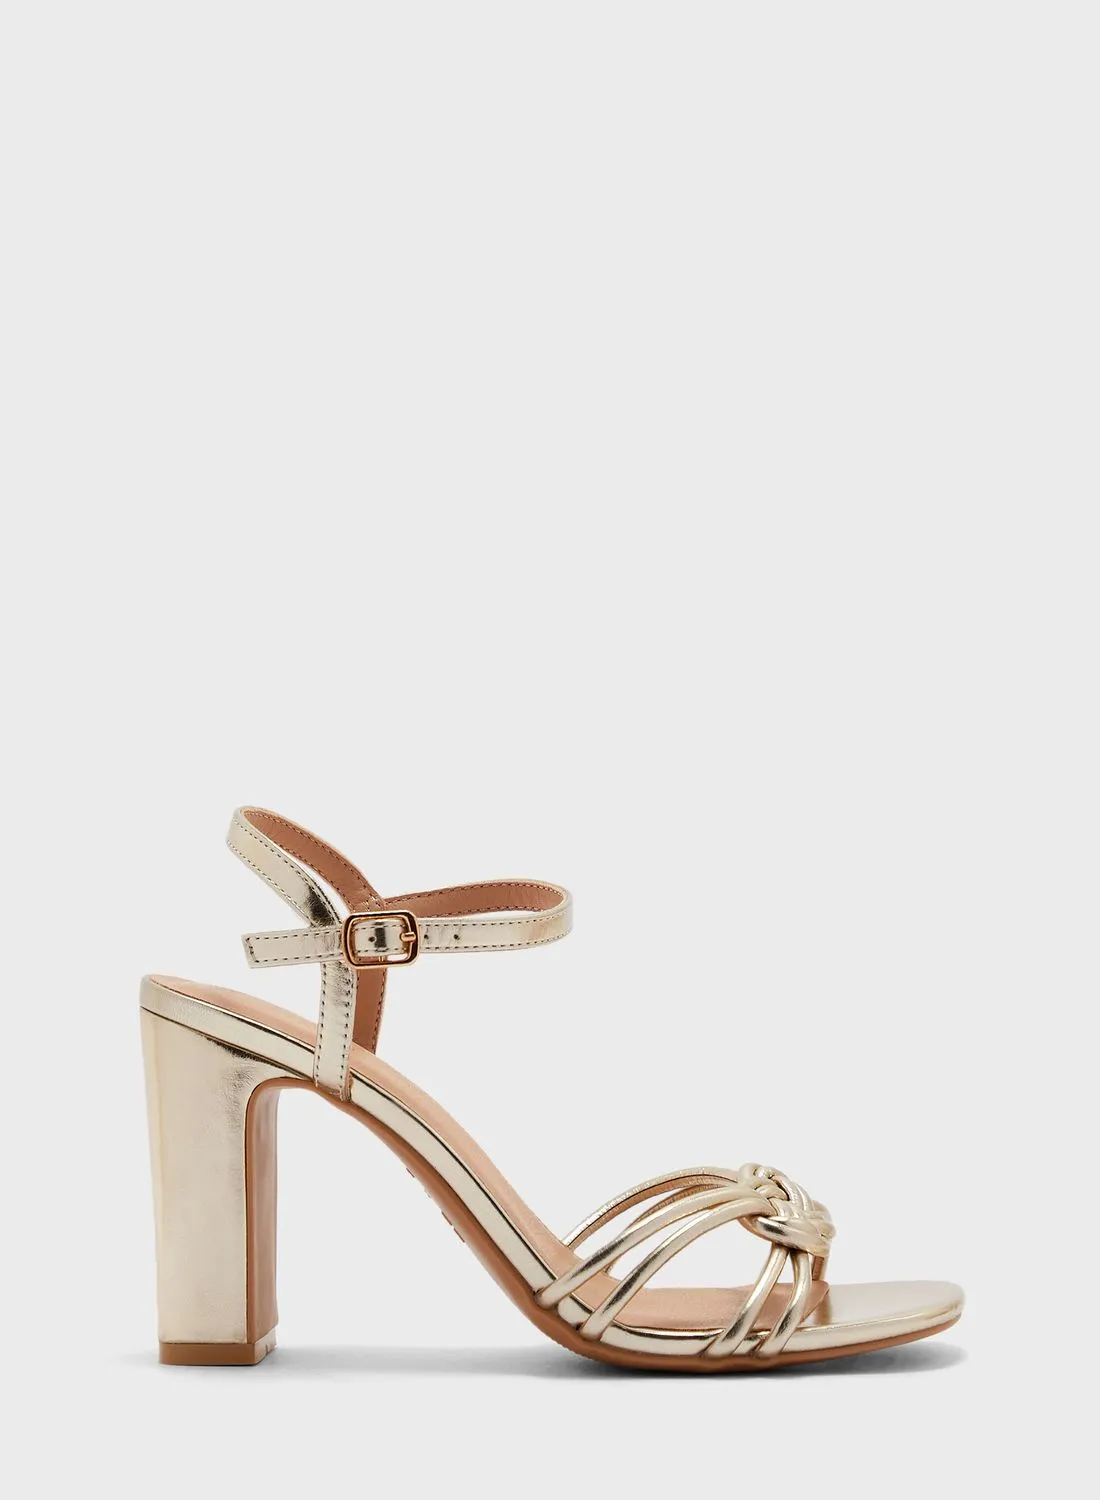 NEW LOOK Twisty Double Strap Sandals